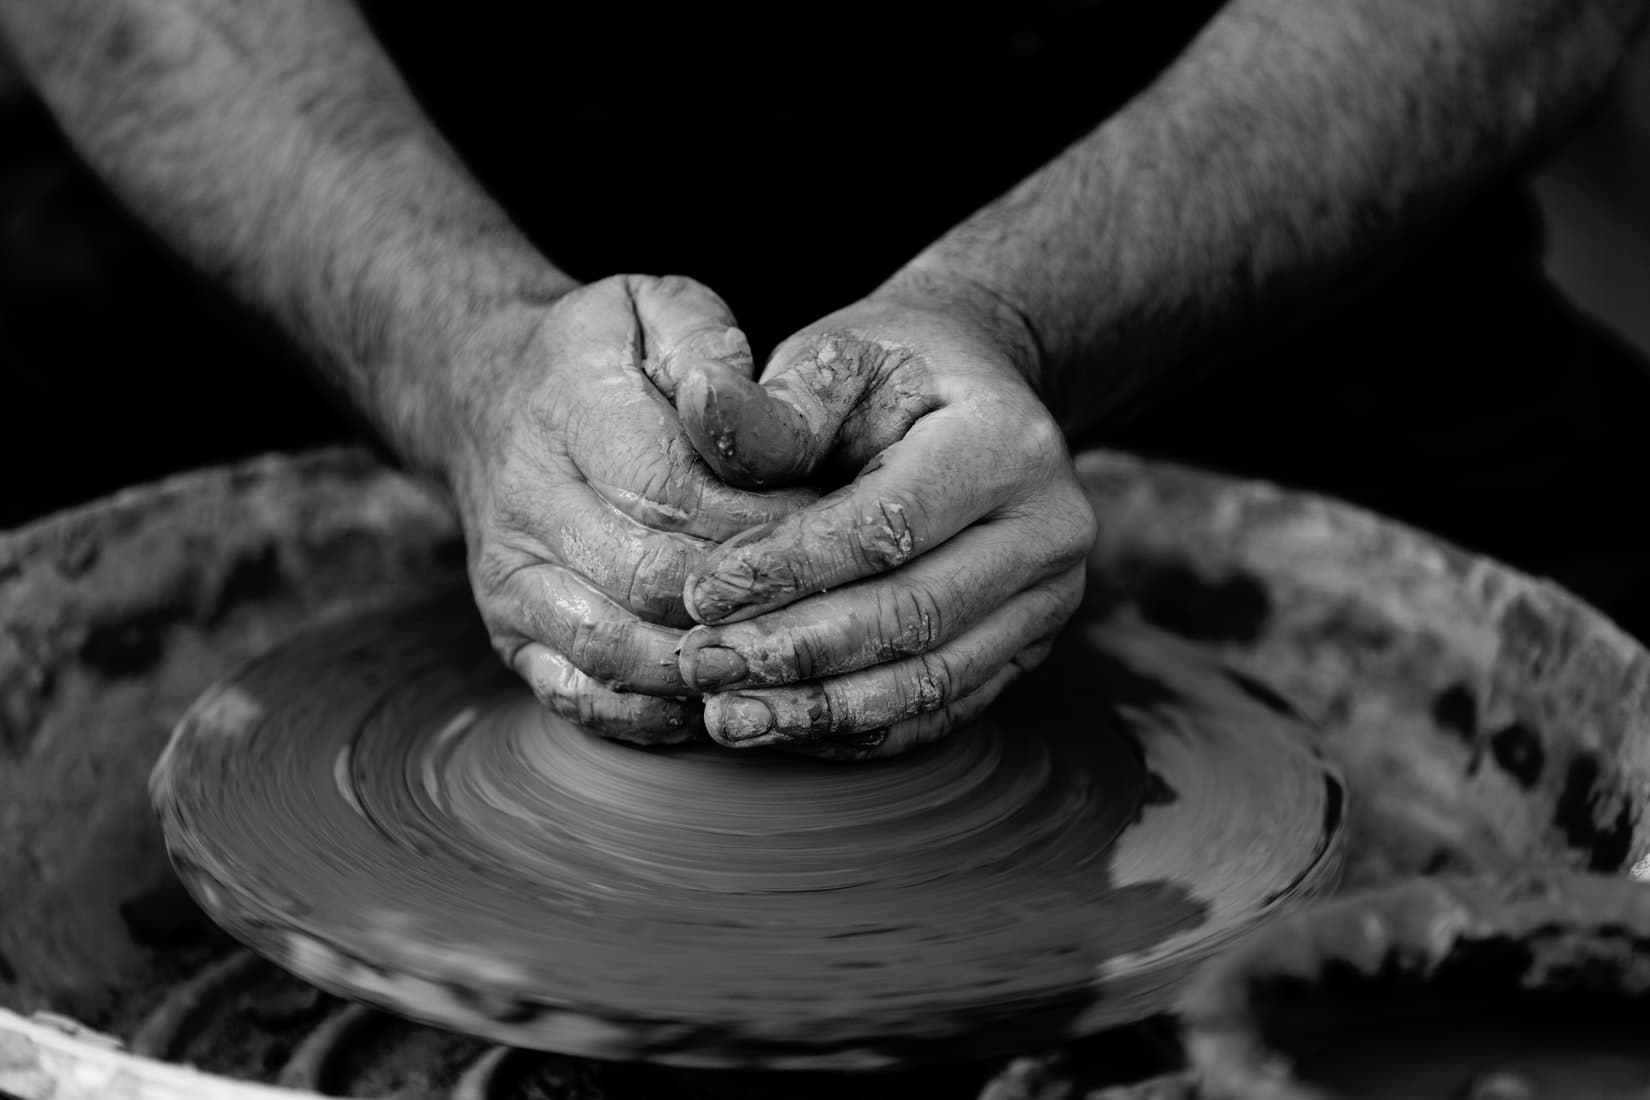 Why make art? Hands on a potter's wheel.